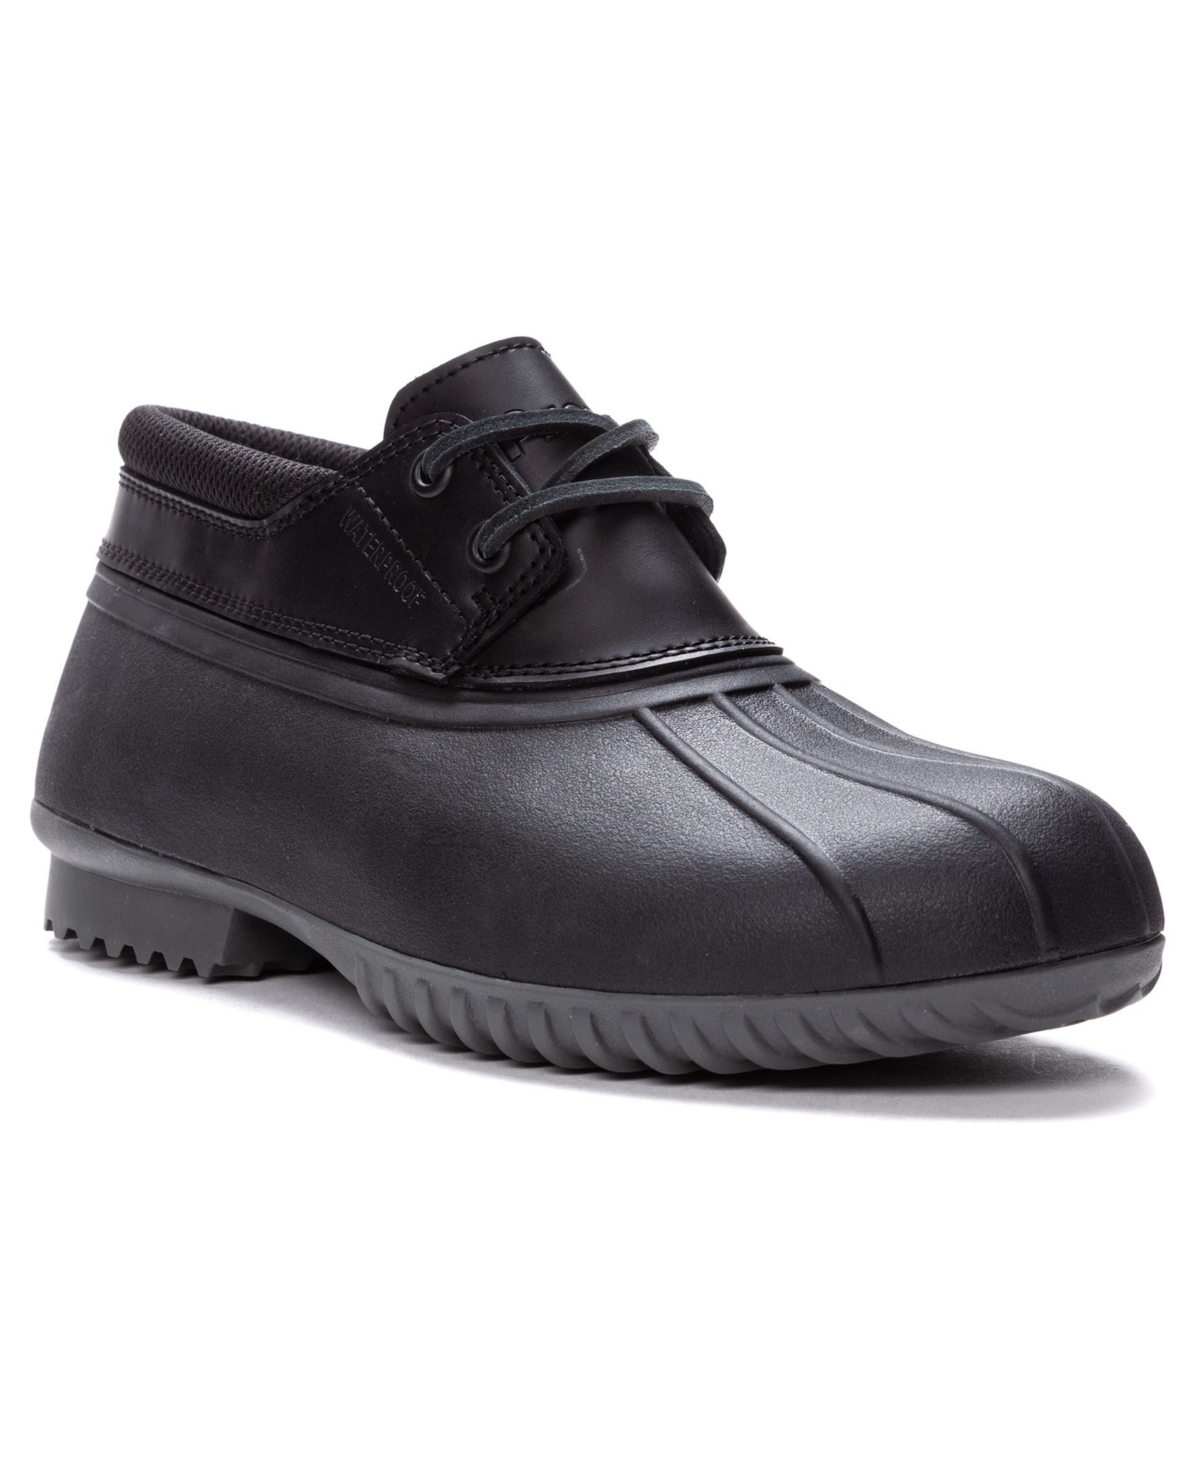 Women's Ione Water-resistant Duck Shoes - Black